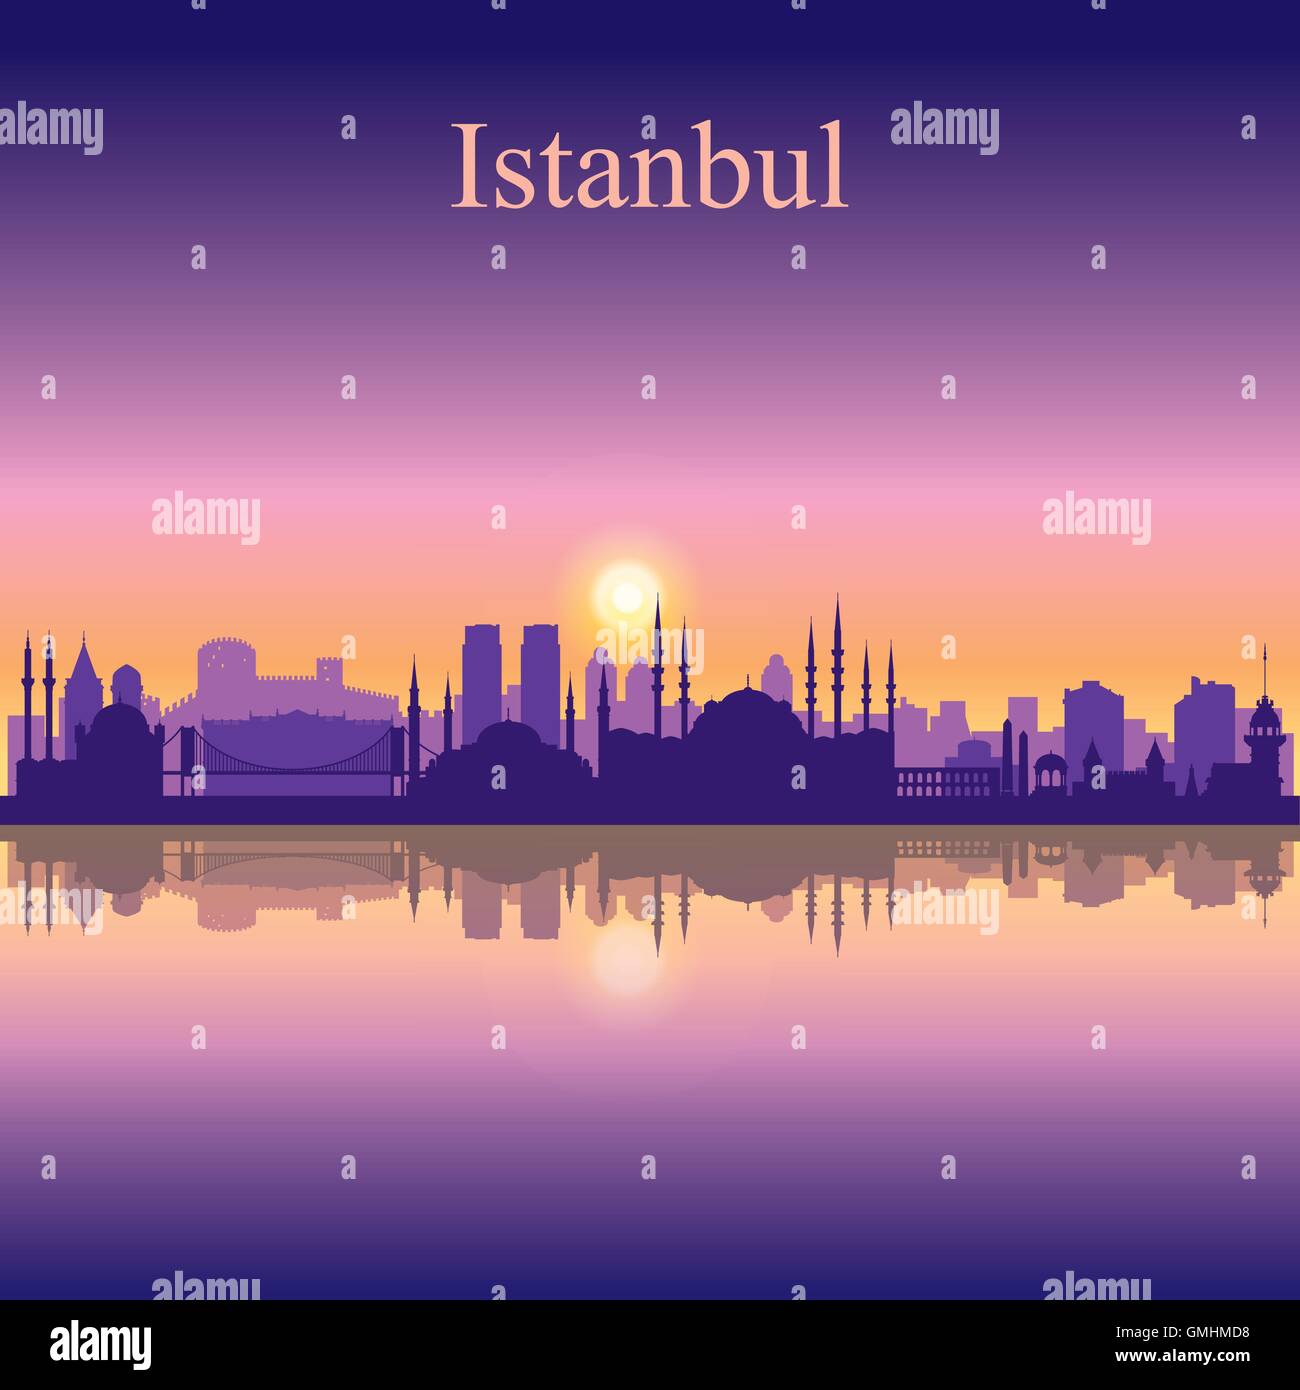 Istanbul city skyline silhouette background Stock Vector